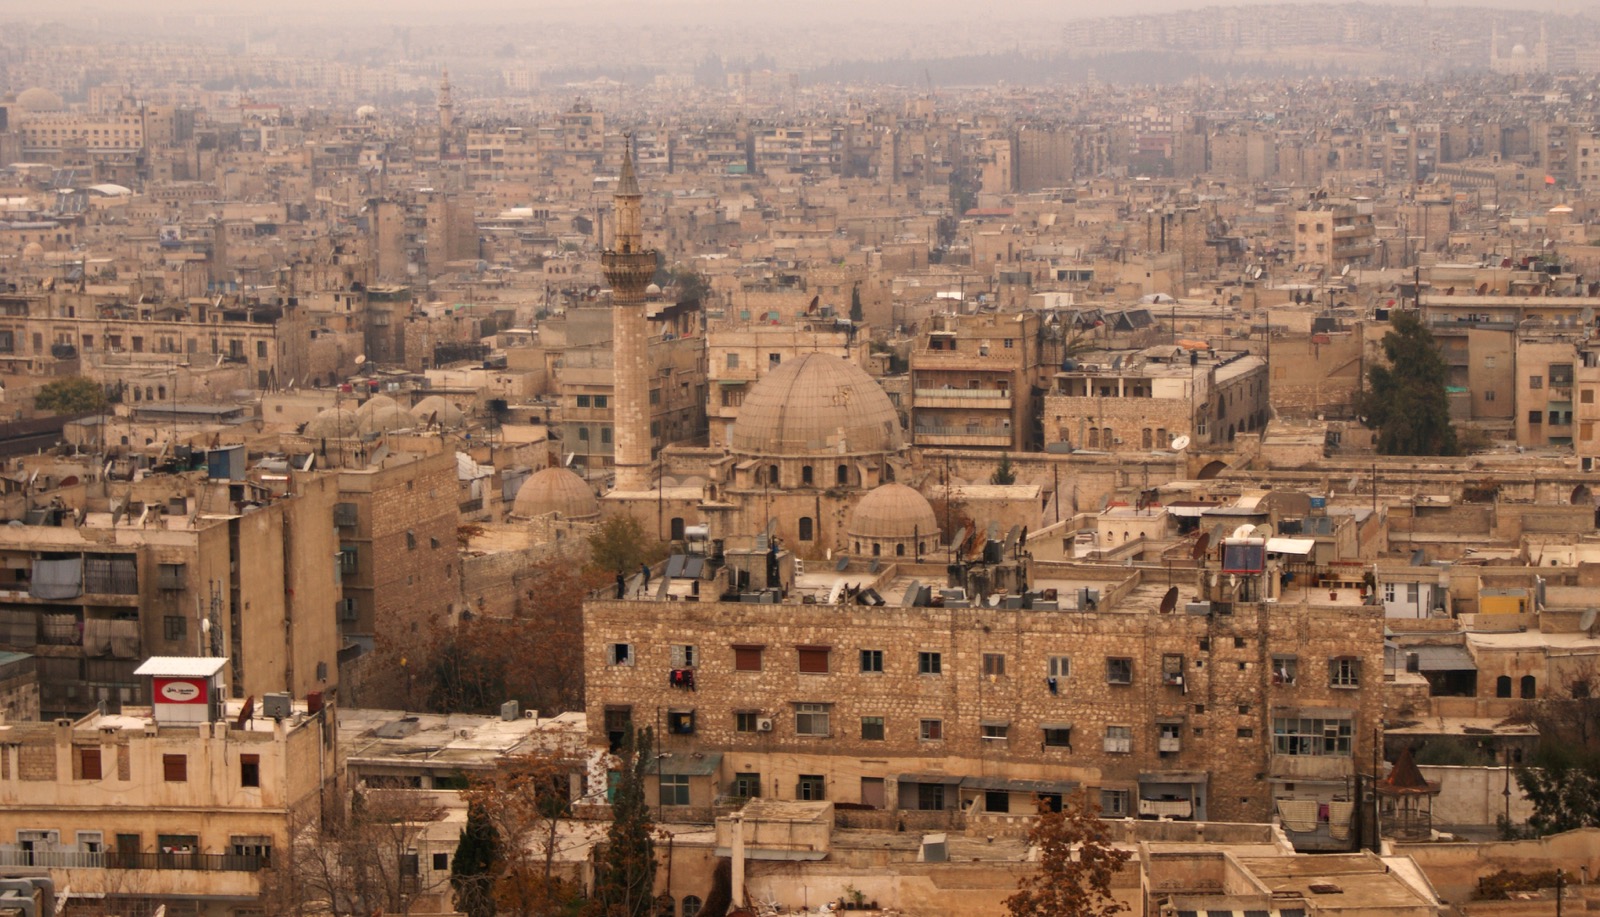 Can You Guess the Asian Country With Just Three Clues? Aleppo, Syria